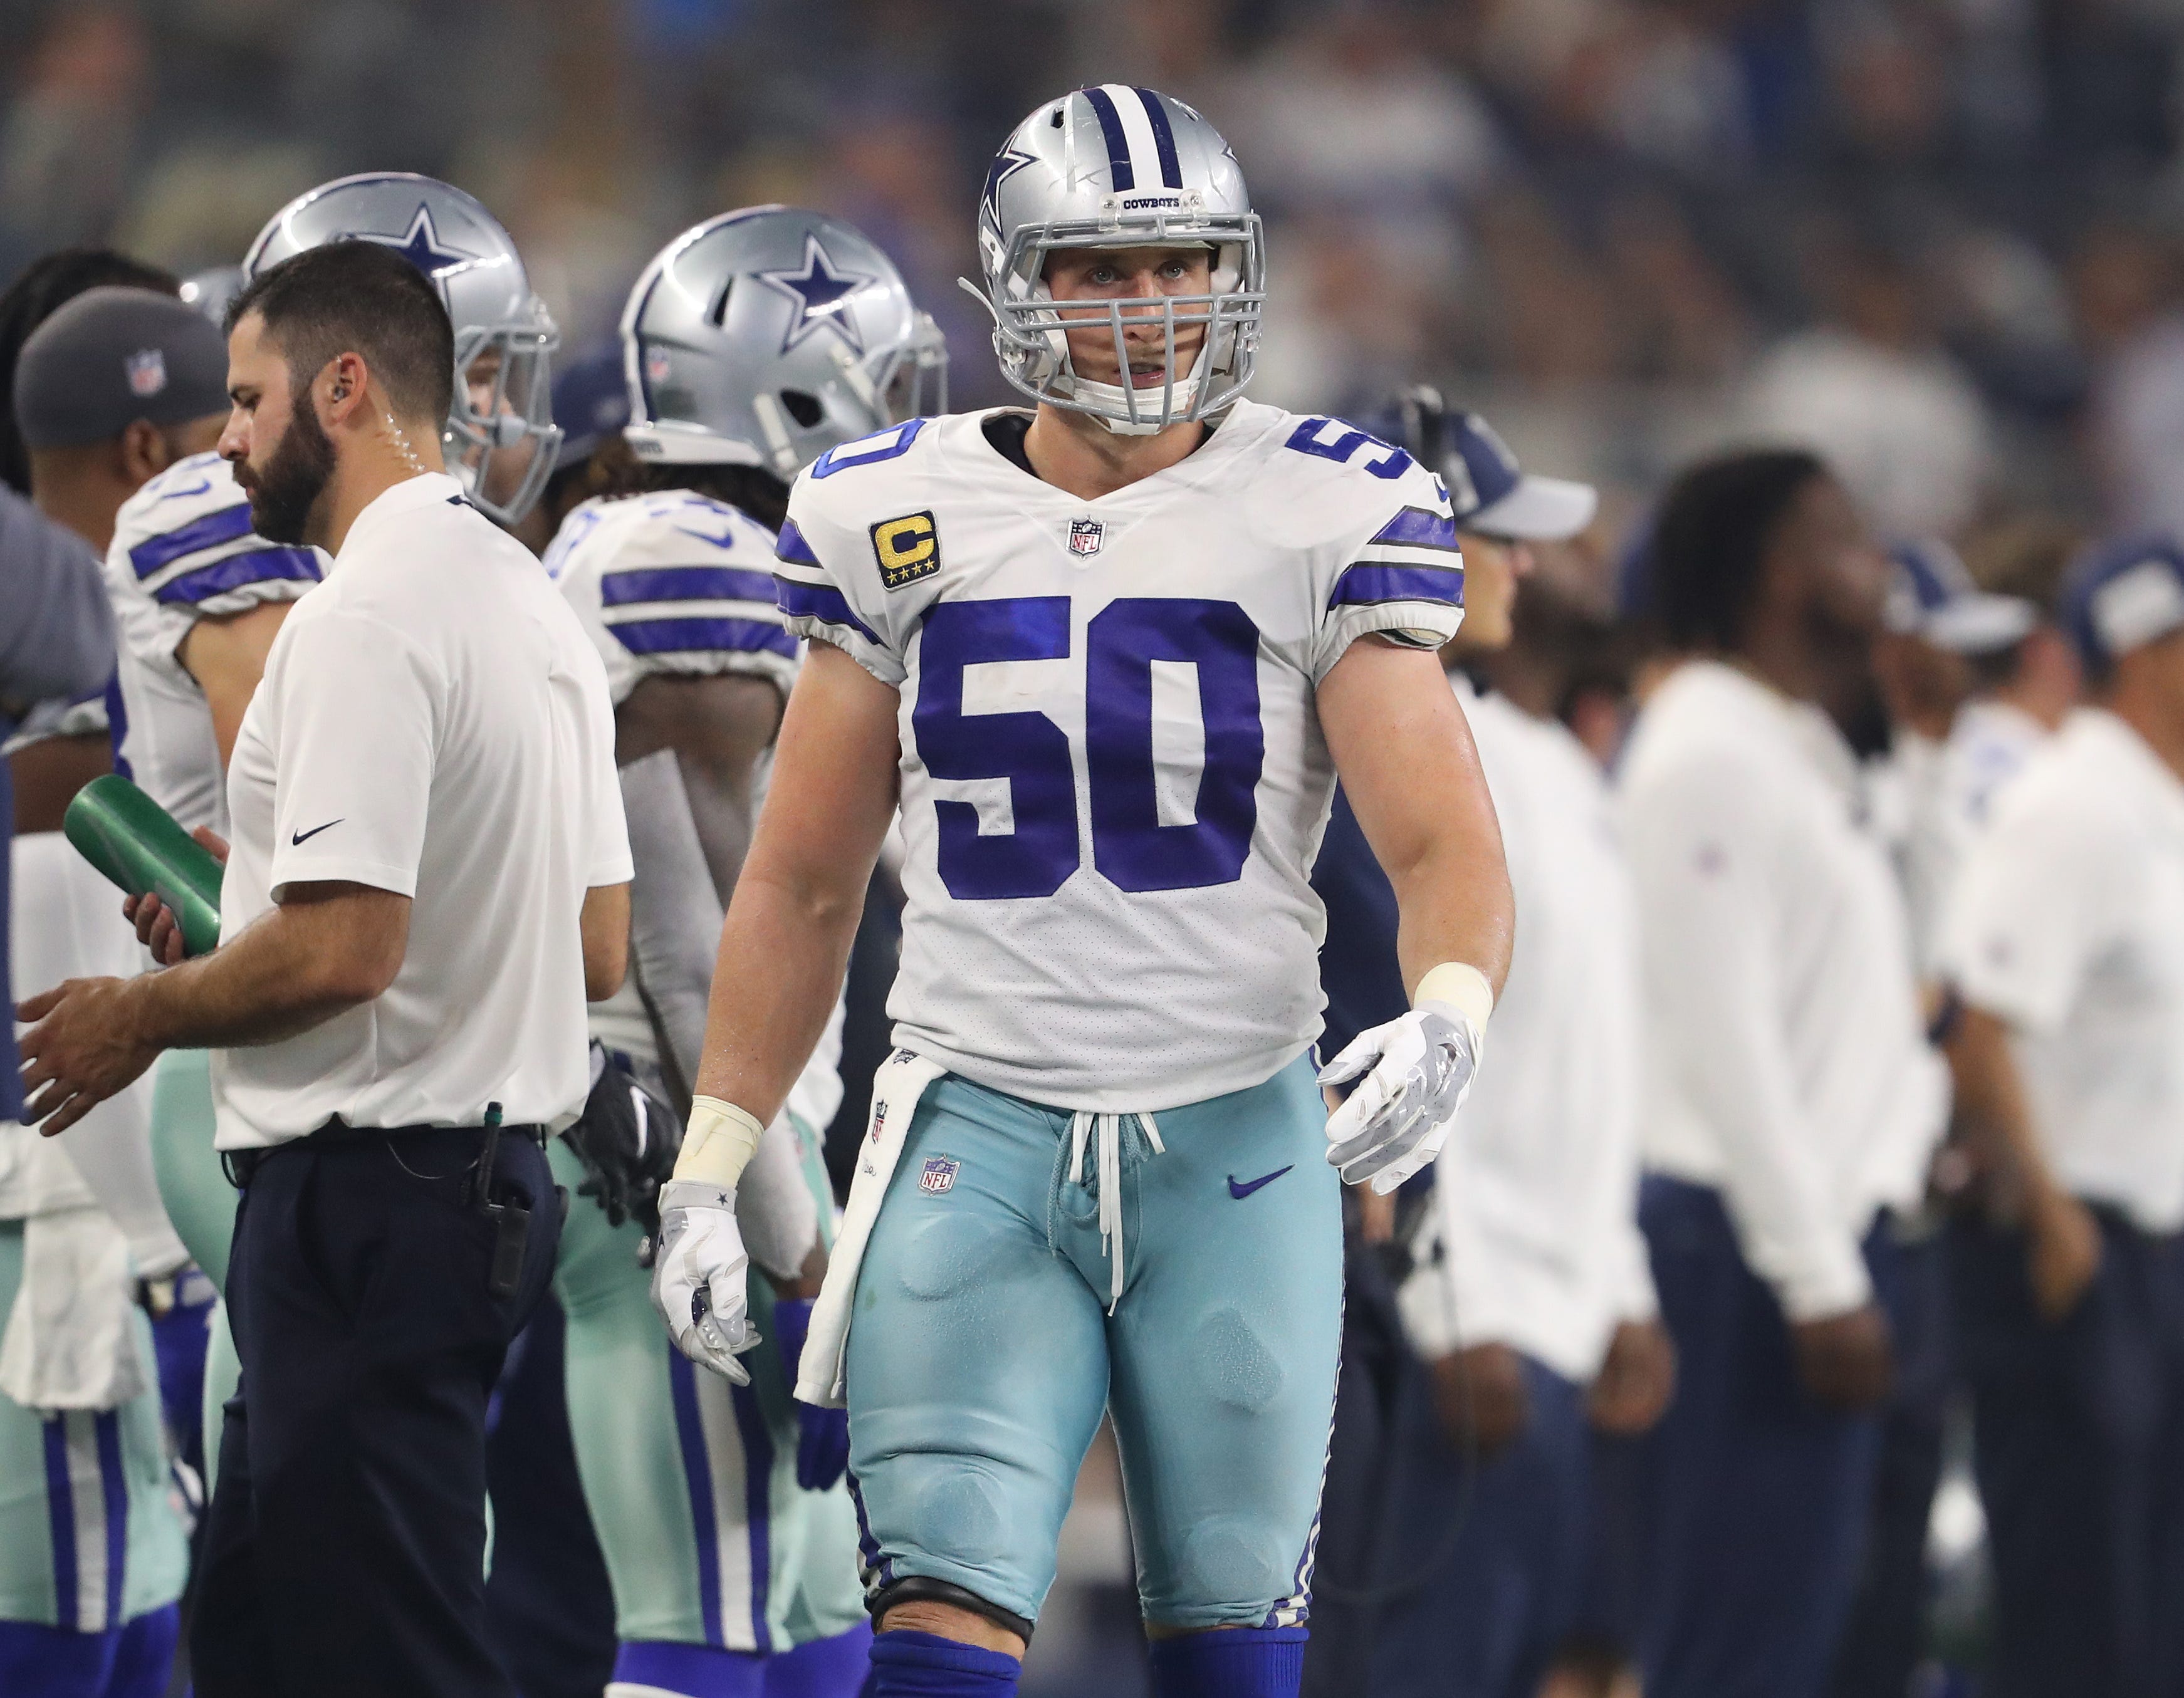 Dallas Cowboys' Sean Lee retires from NFL after 11 seasons